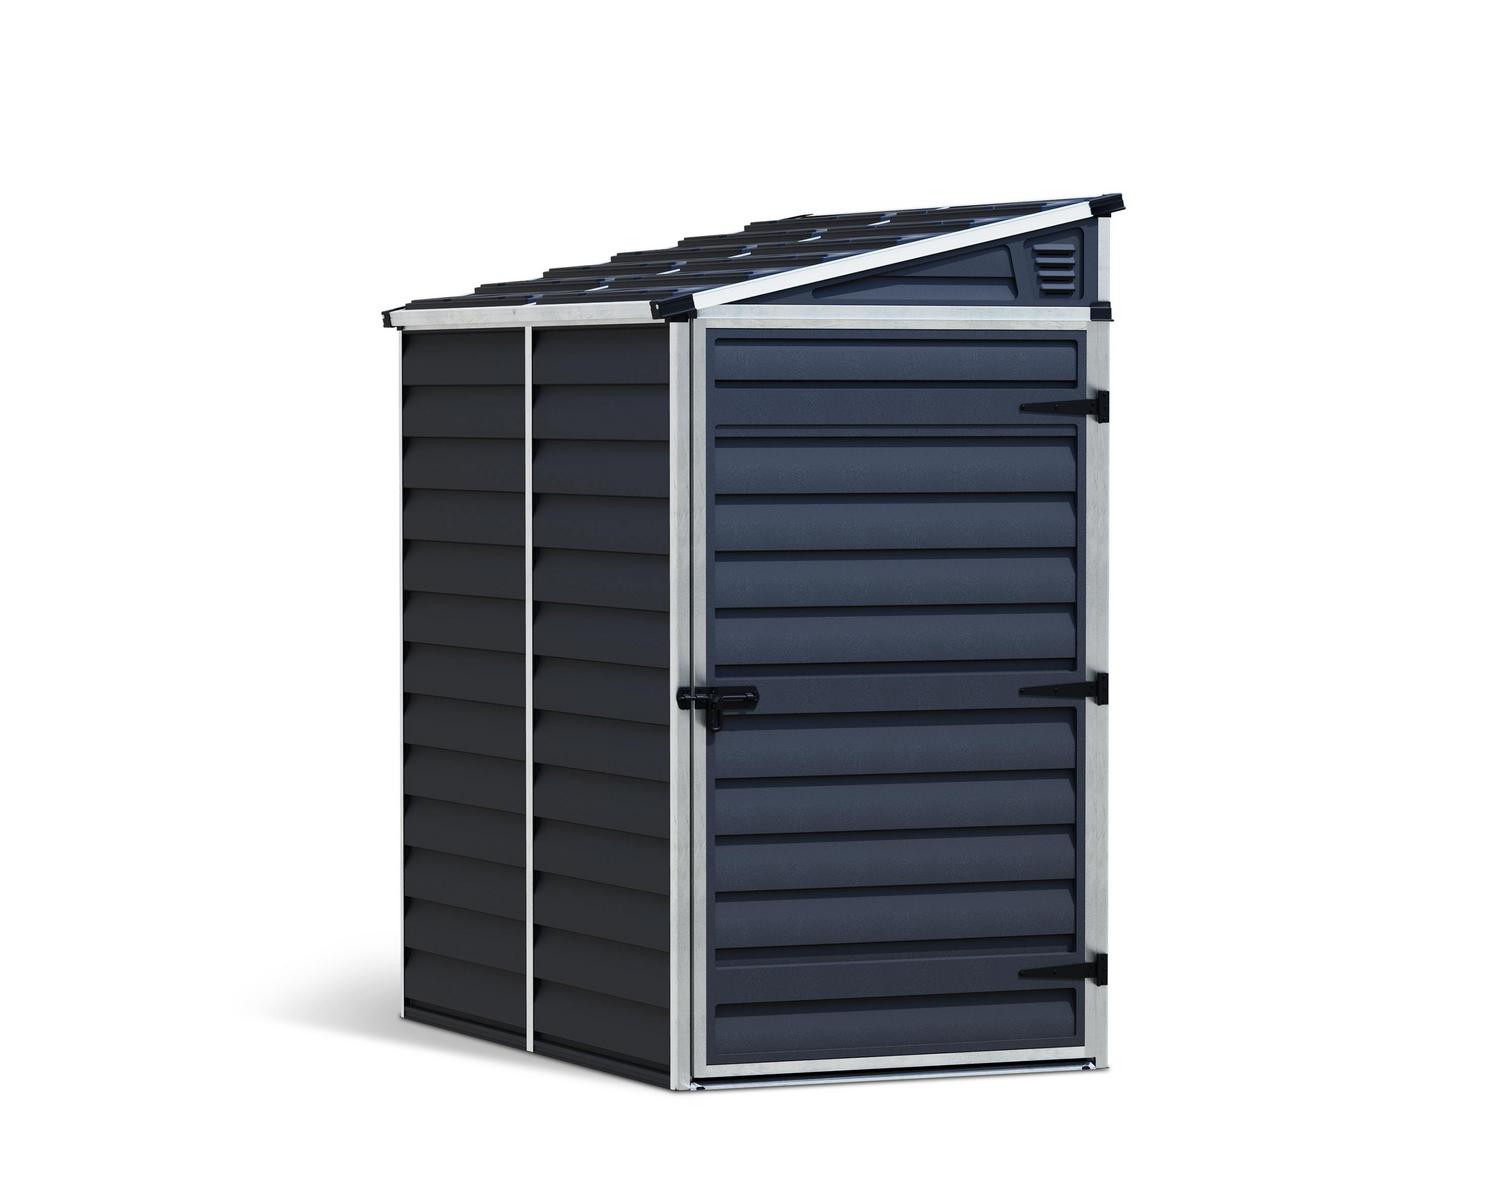 Pent 4 ft. x 6 ft. Plastic Storage Shed with Midnight Grey Polycarbonate Panels & Aluminium Frame